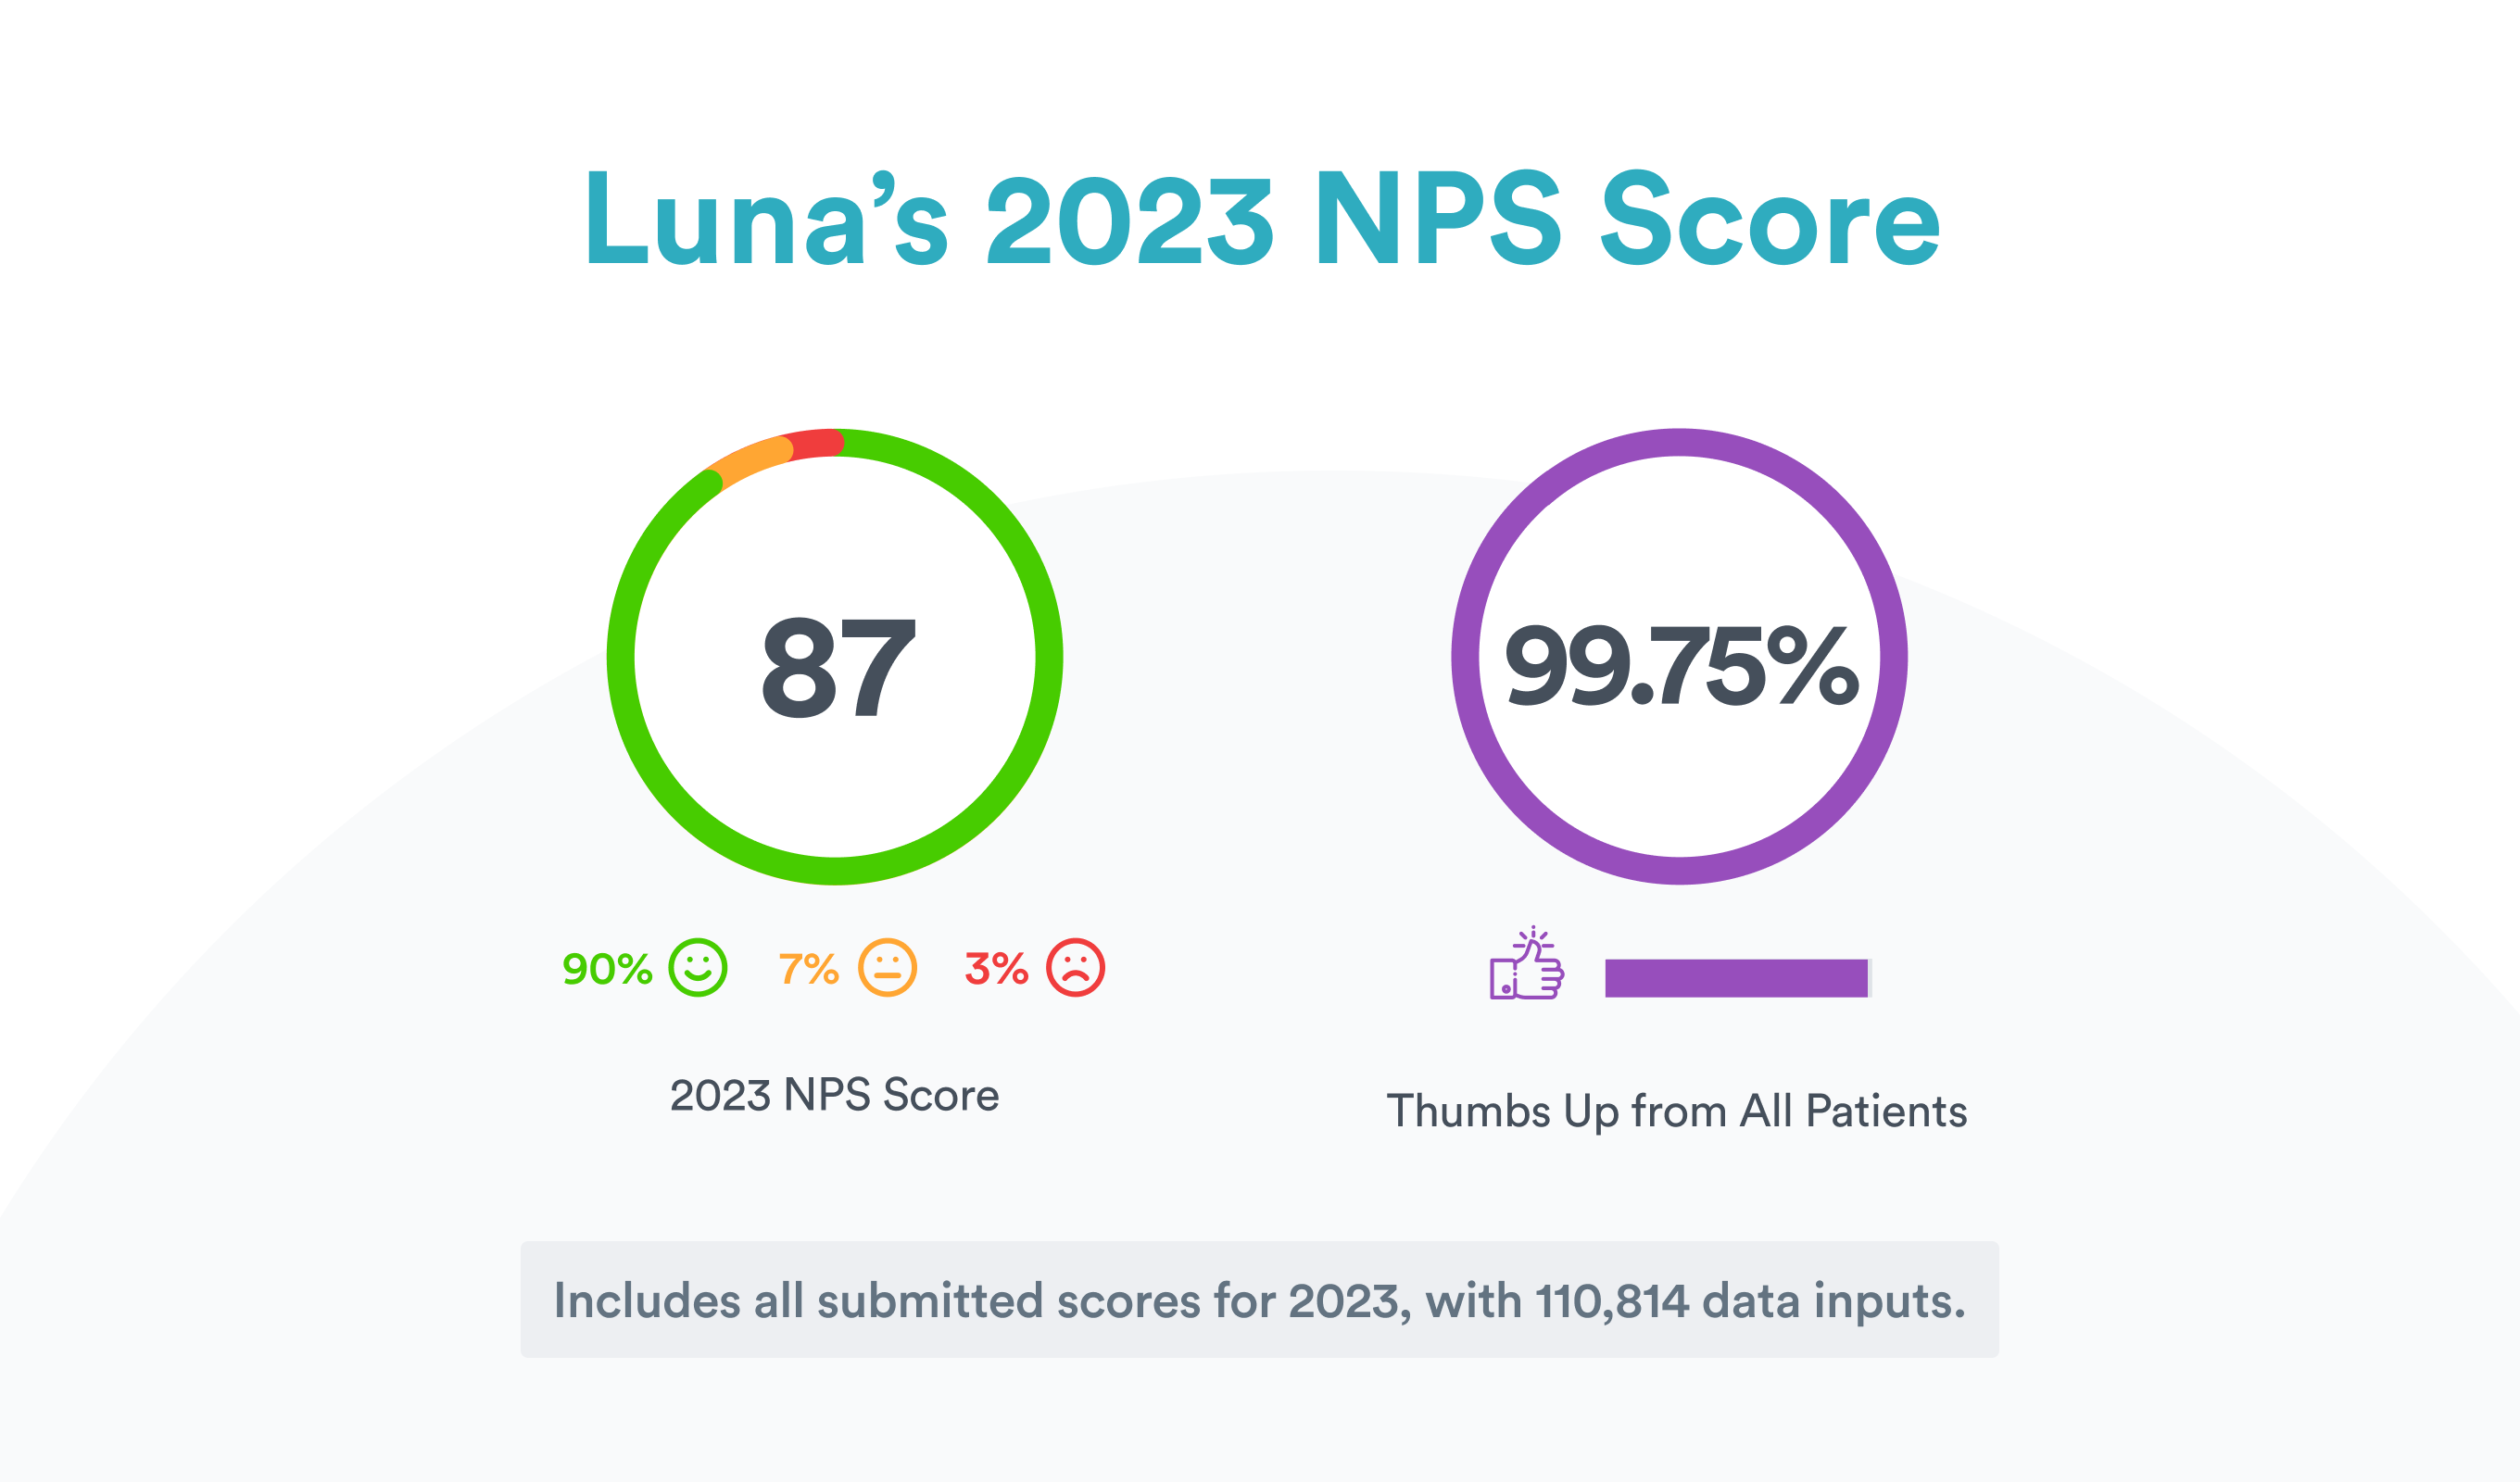 Luna Attains World-Class NPS and Patient Satisfaction 4 Years in a Row